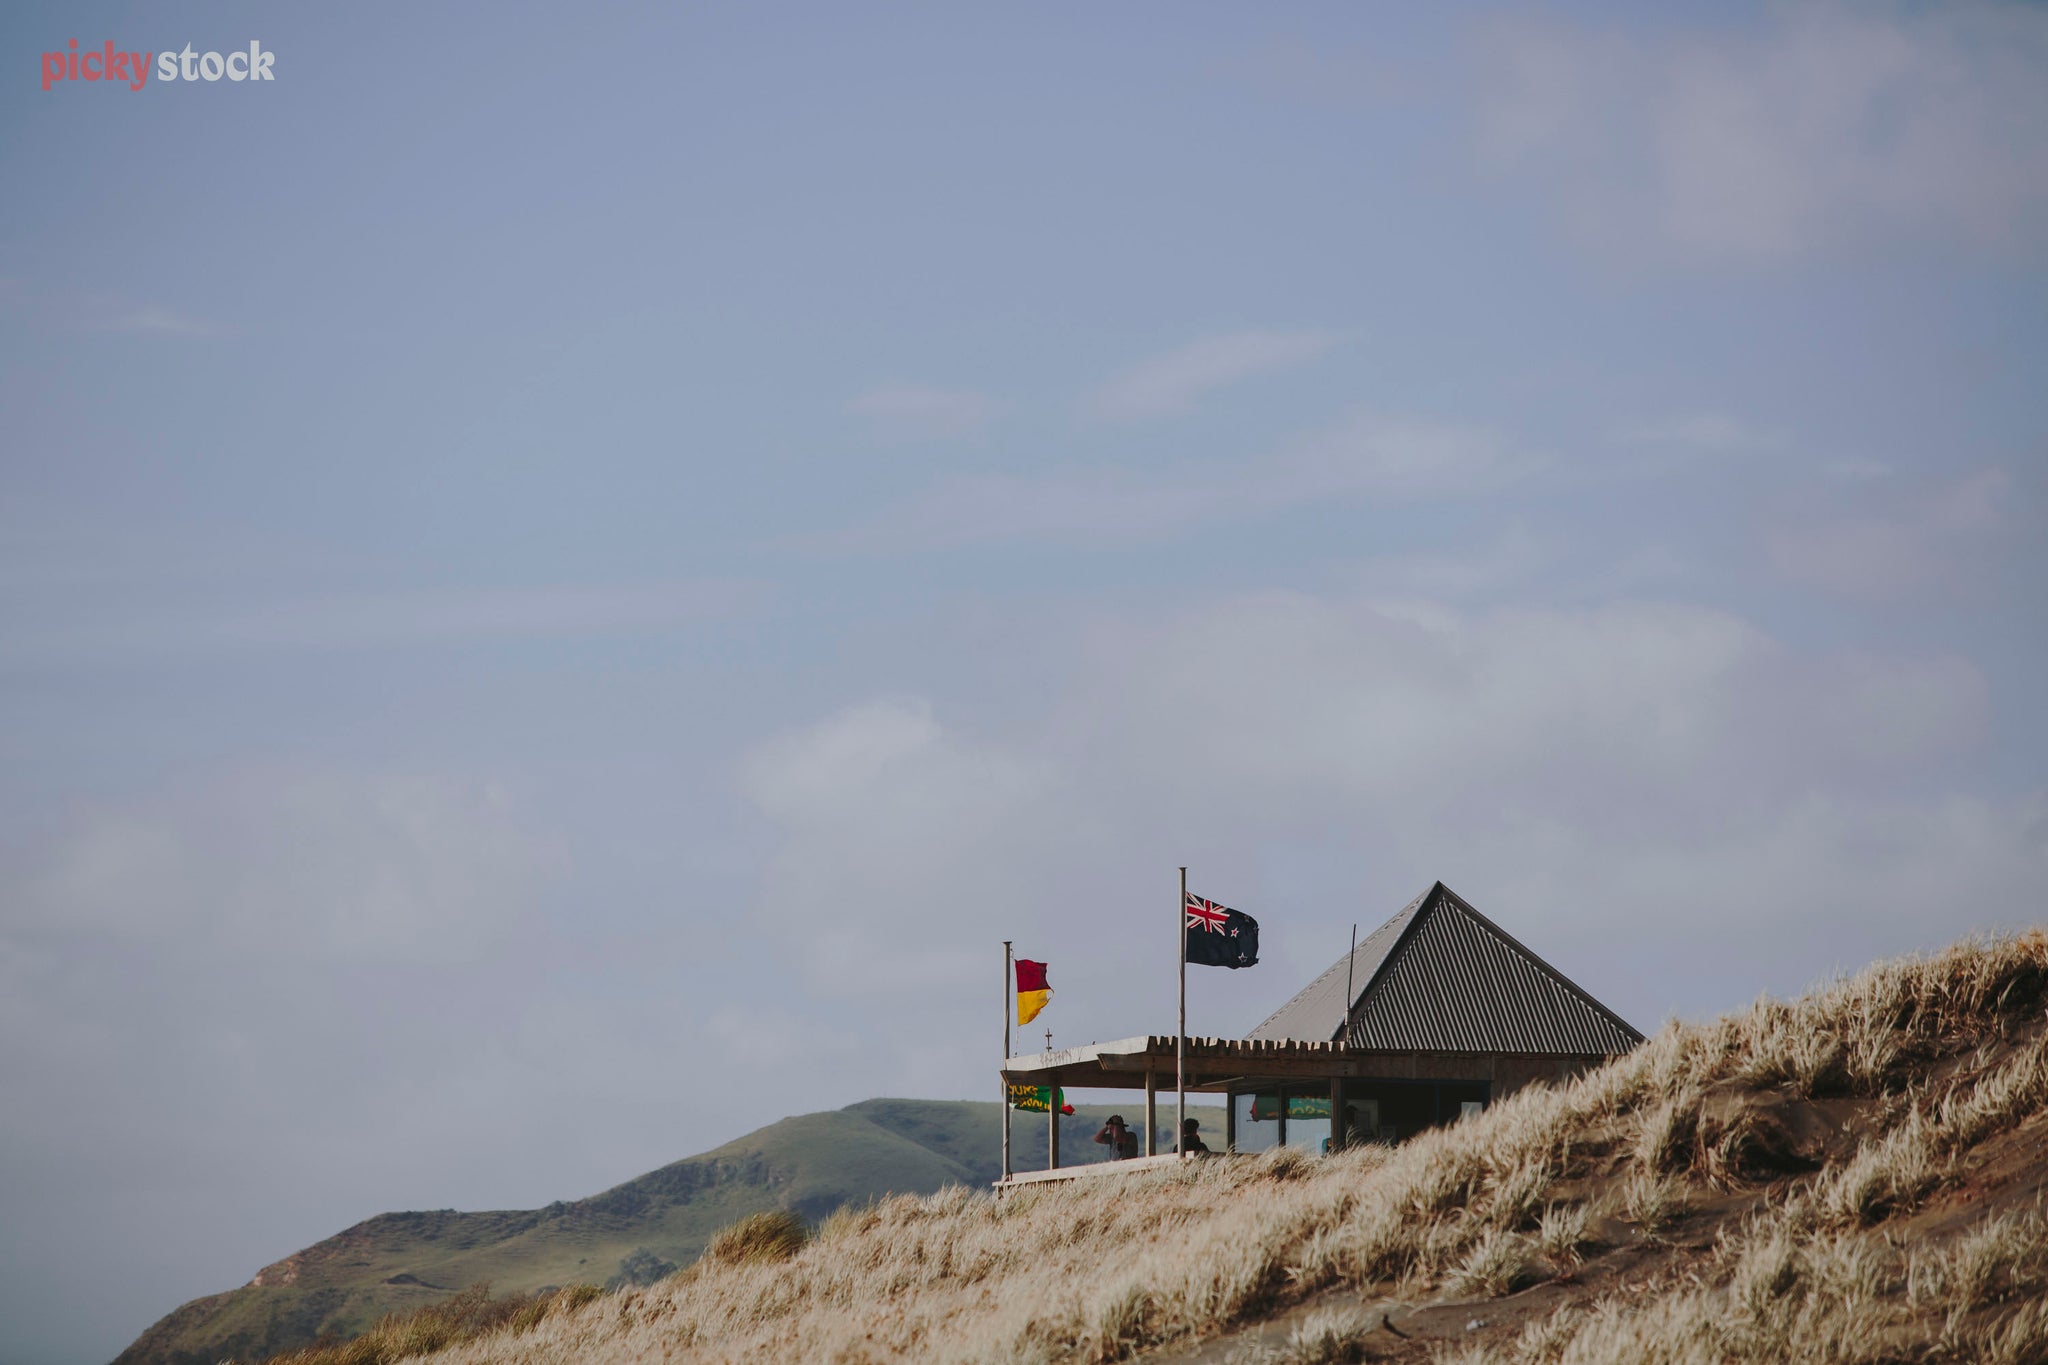 Surf club building sits nestled amongst black sand dunes on West Coast beach. The surf flags are out, seen from a side angle along the sand dunes. 